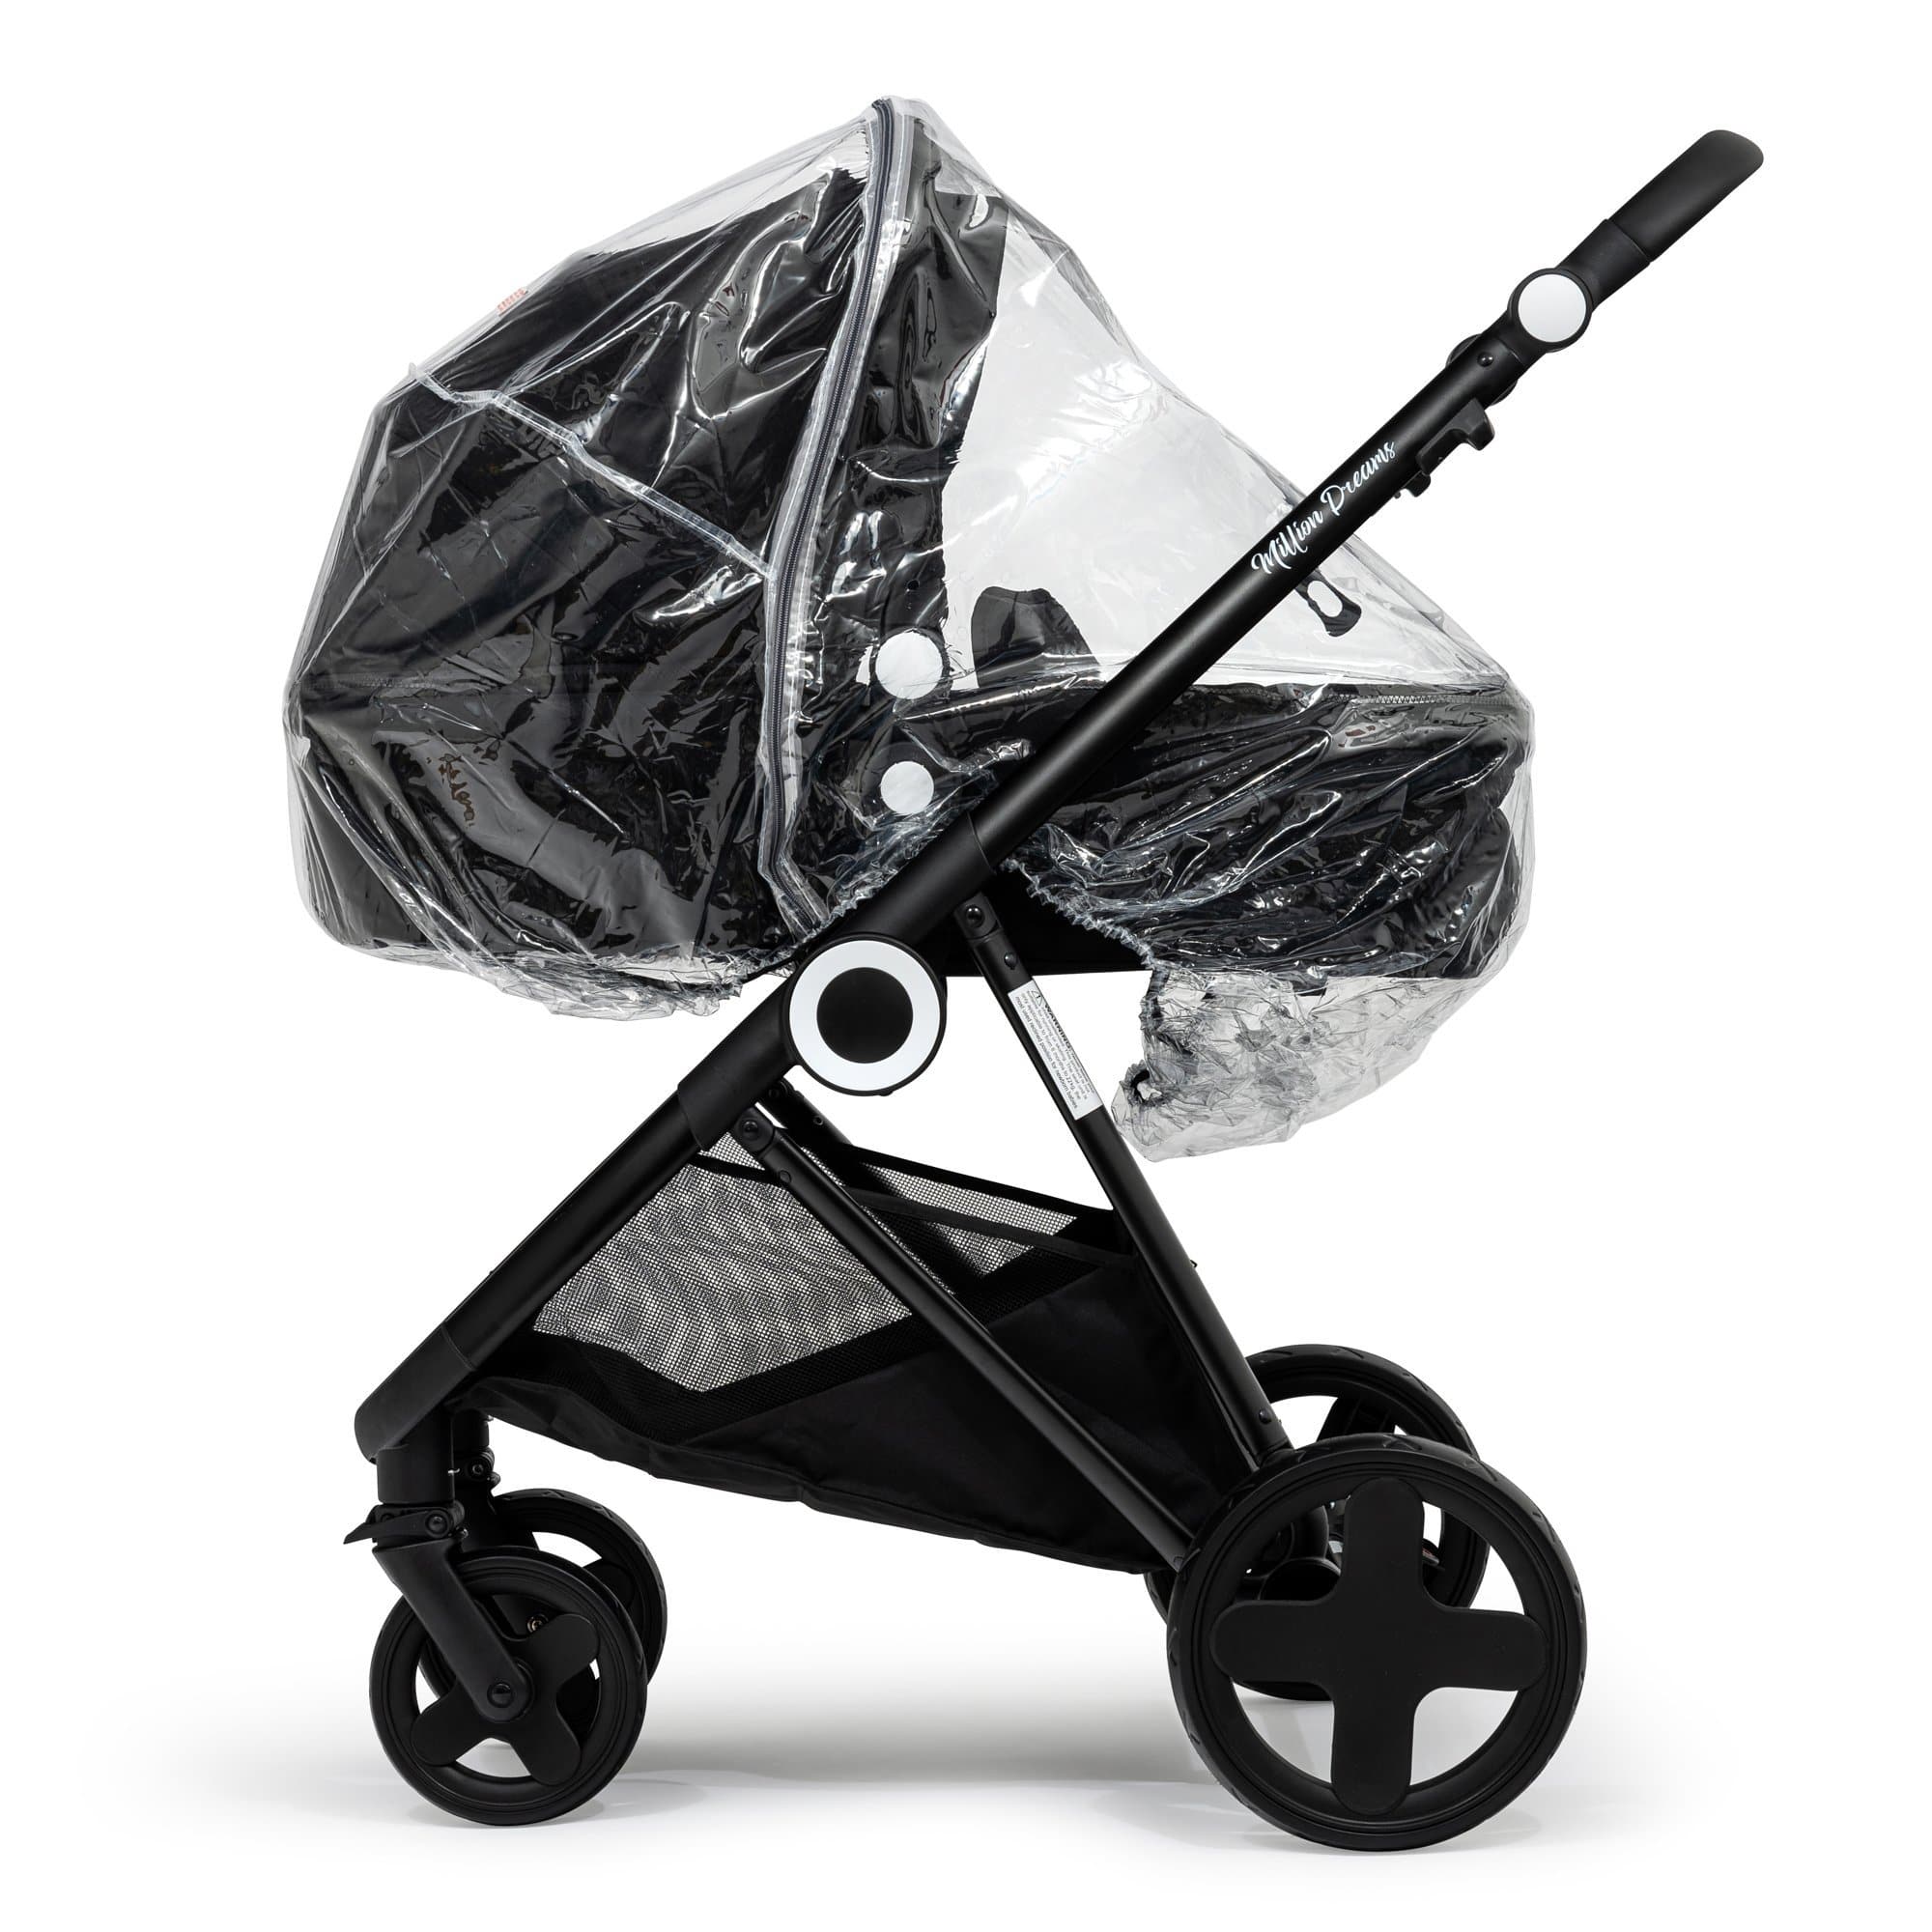 2 in 1 Rain Cover Compatible with Red Kite - Fits All Models - For Your Little One